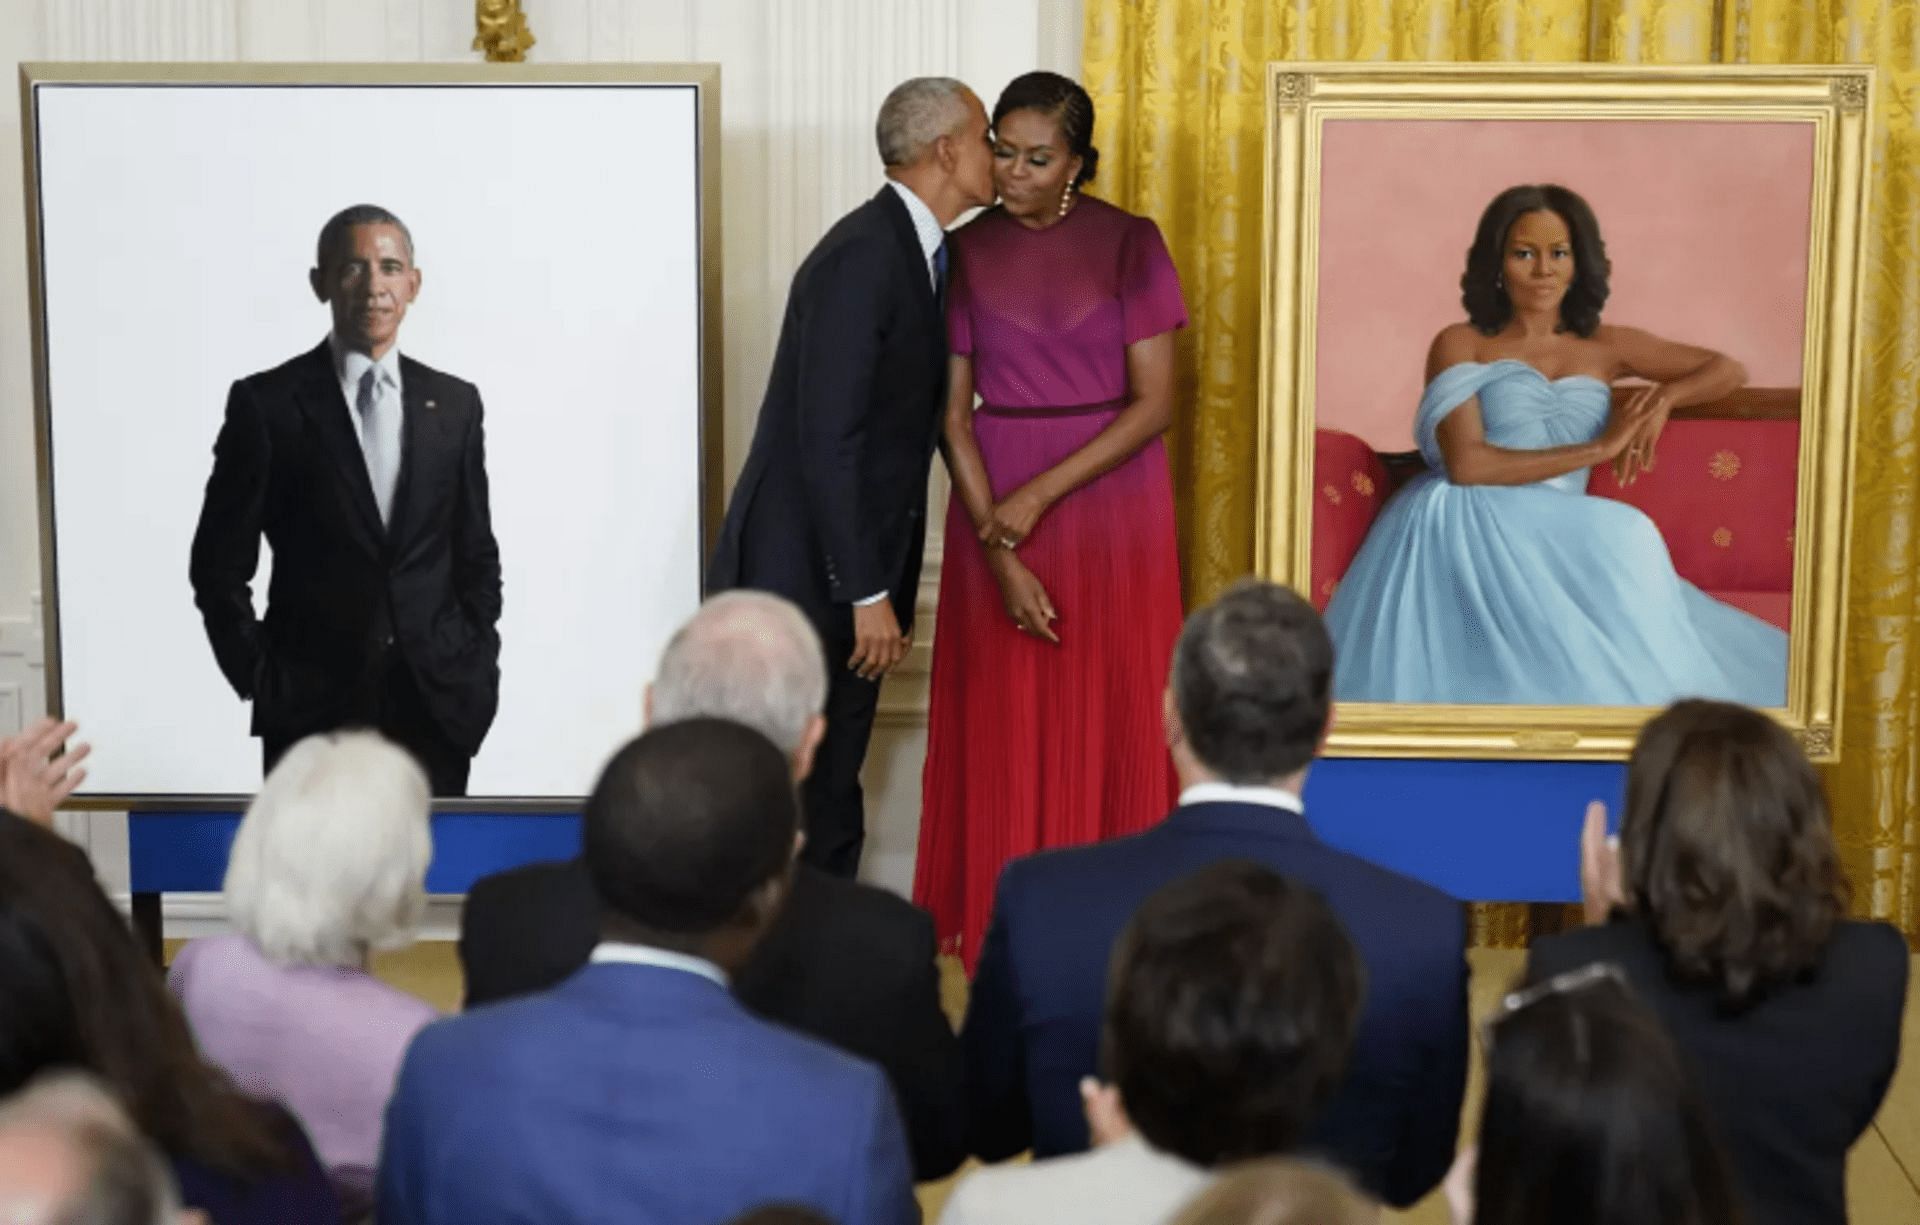 Michelle Obama impresses Twitter with recent White House speech (Image via AP)